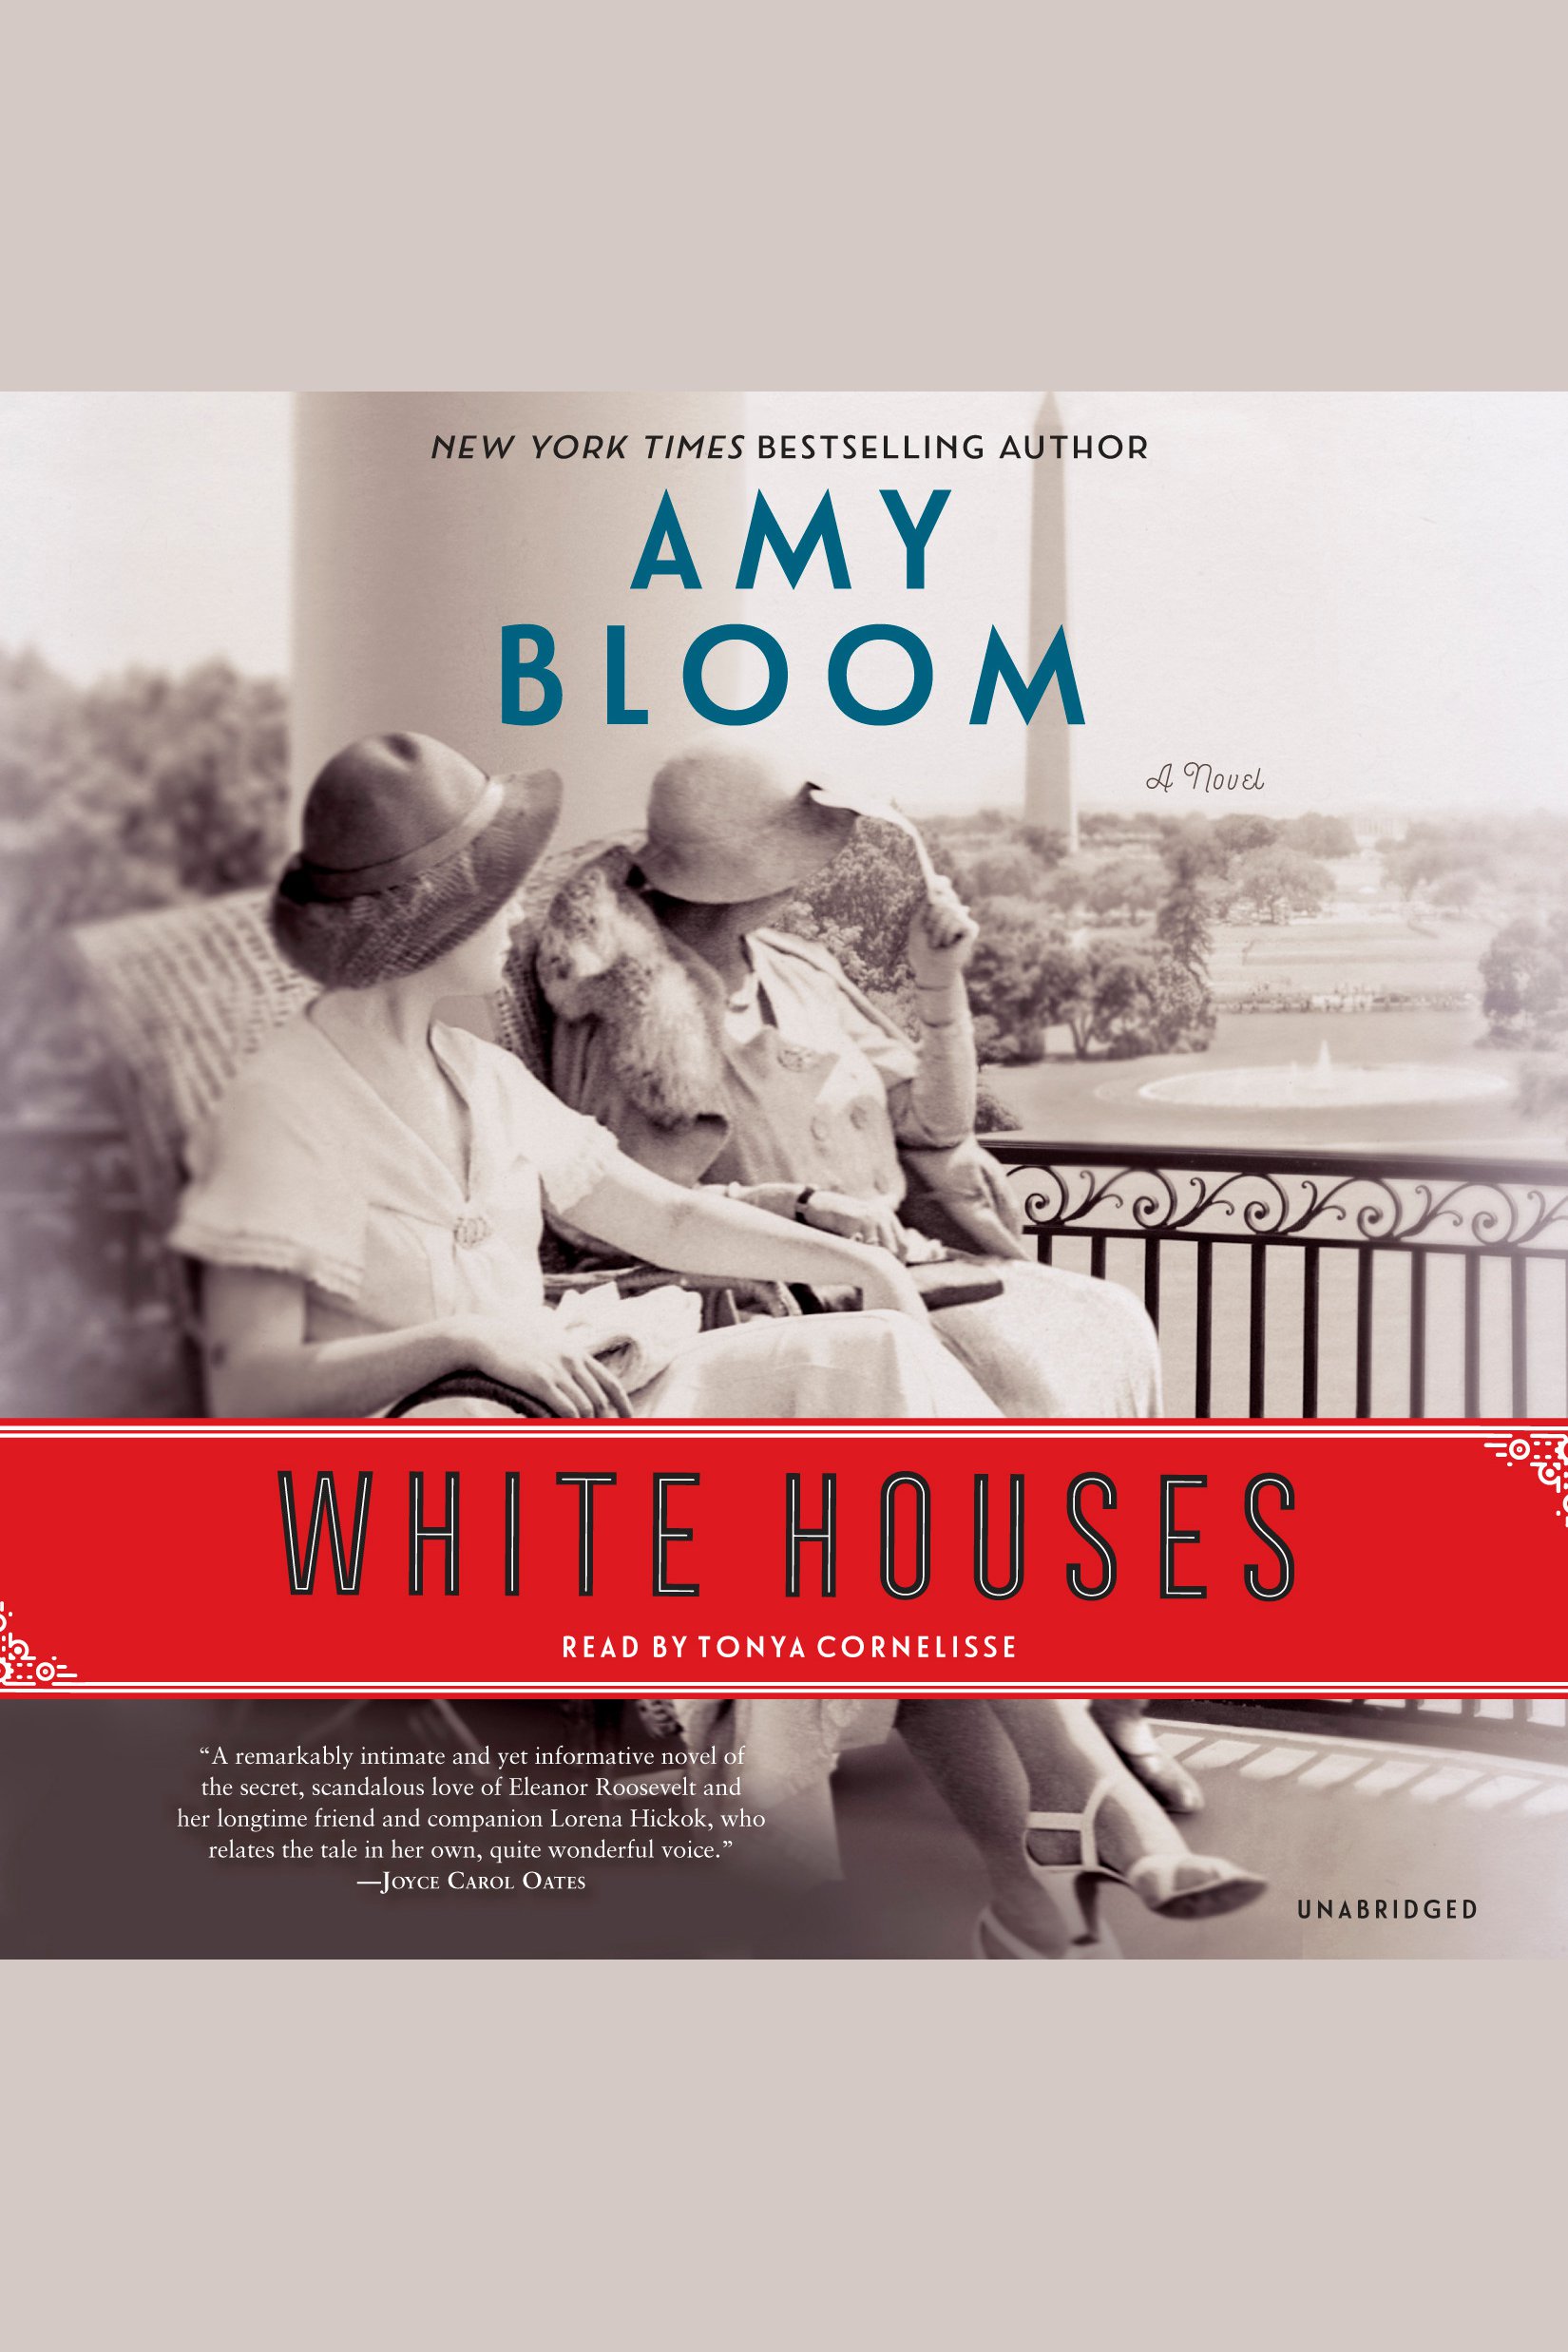 White houses cover image